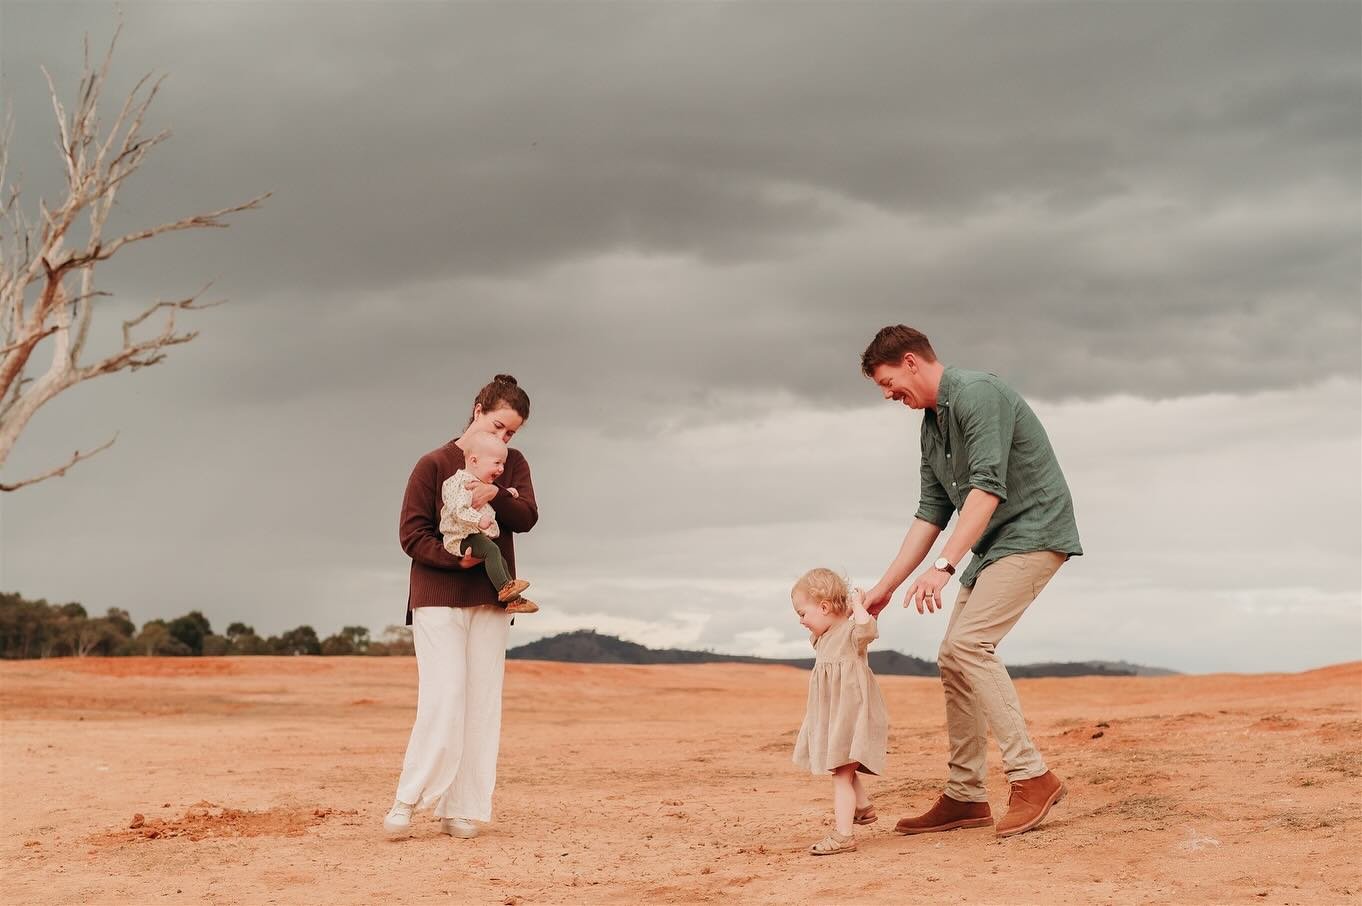 A stormy day getting caught in the rain which can only be described as complete perfection. A glorious stormy sky, a dried up lake and the warmth of their love. Capturing the beauty of raising their two golden girls. The most remarkable of evenings w